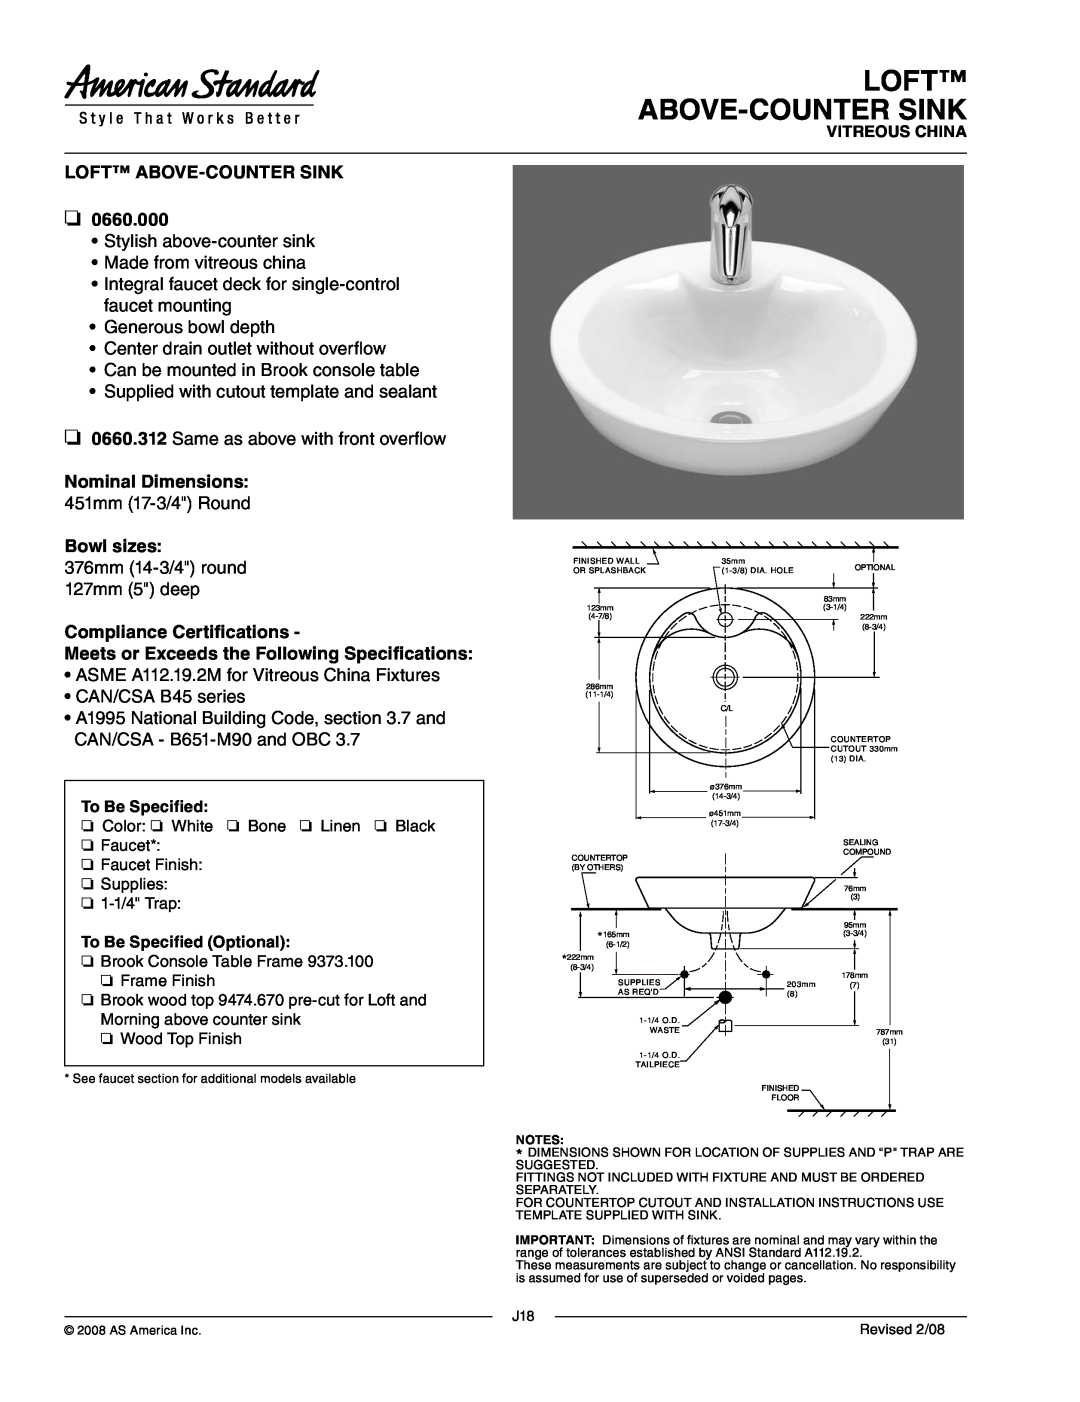 American Standard 0660.312 dimensions Loft Above-Countersink, Nominal Dimensions, Bowl sizes, Compliance Certifications 